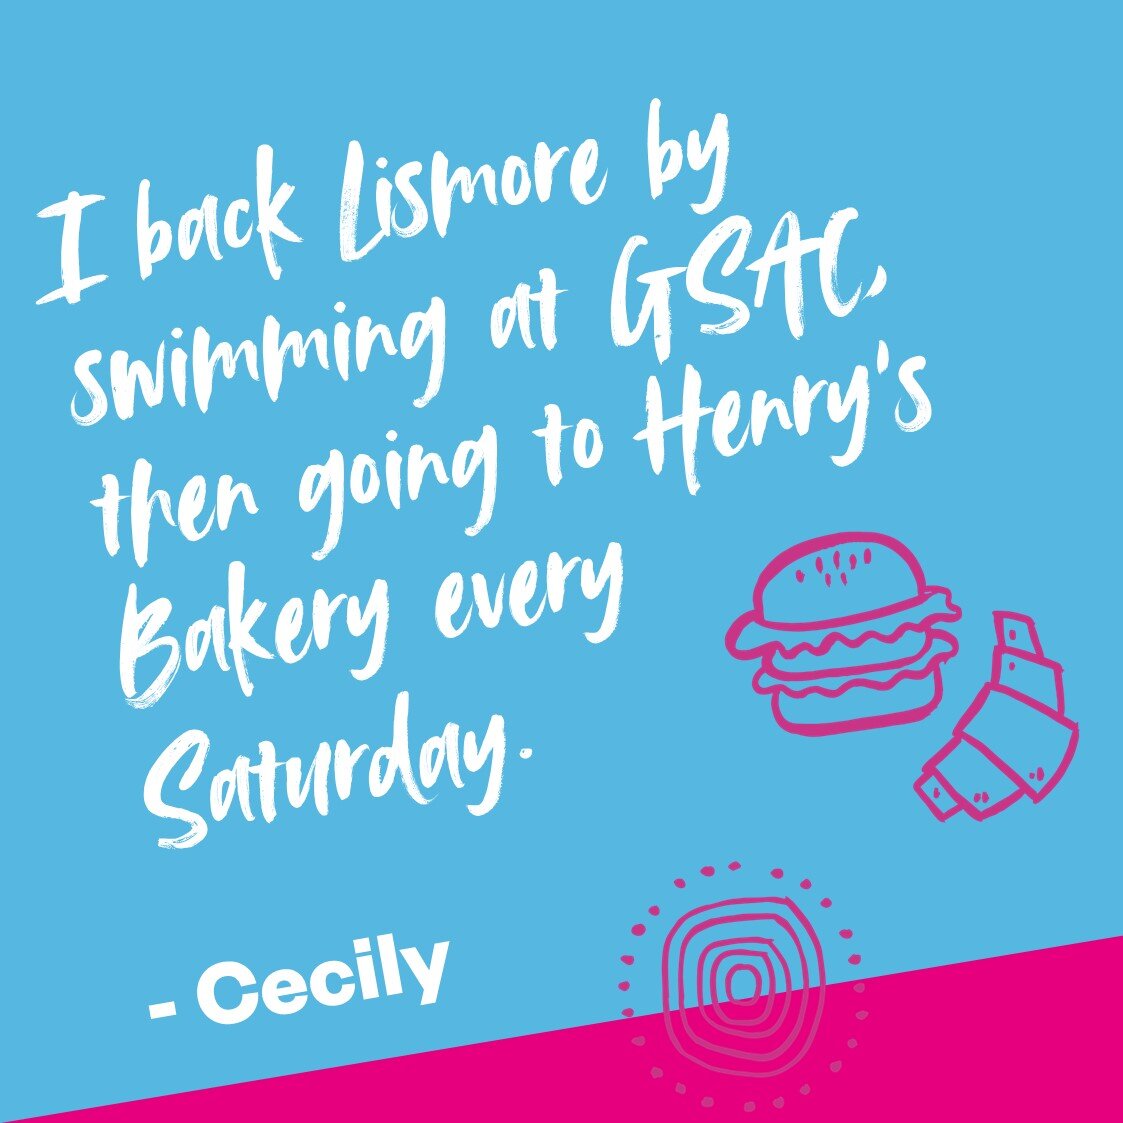 Do you have a weekend ritual like Cecily? Share your favourite Lismore weekend activities in the comments below. 

If you&rsquo;re looking for inspiration on what to do this weekend &ndash; check out the &lsquo;What&rsquo;s On&rsquo; guide on the www